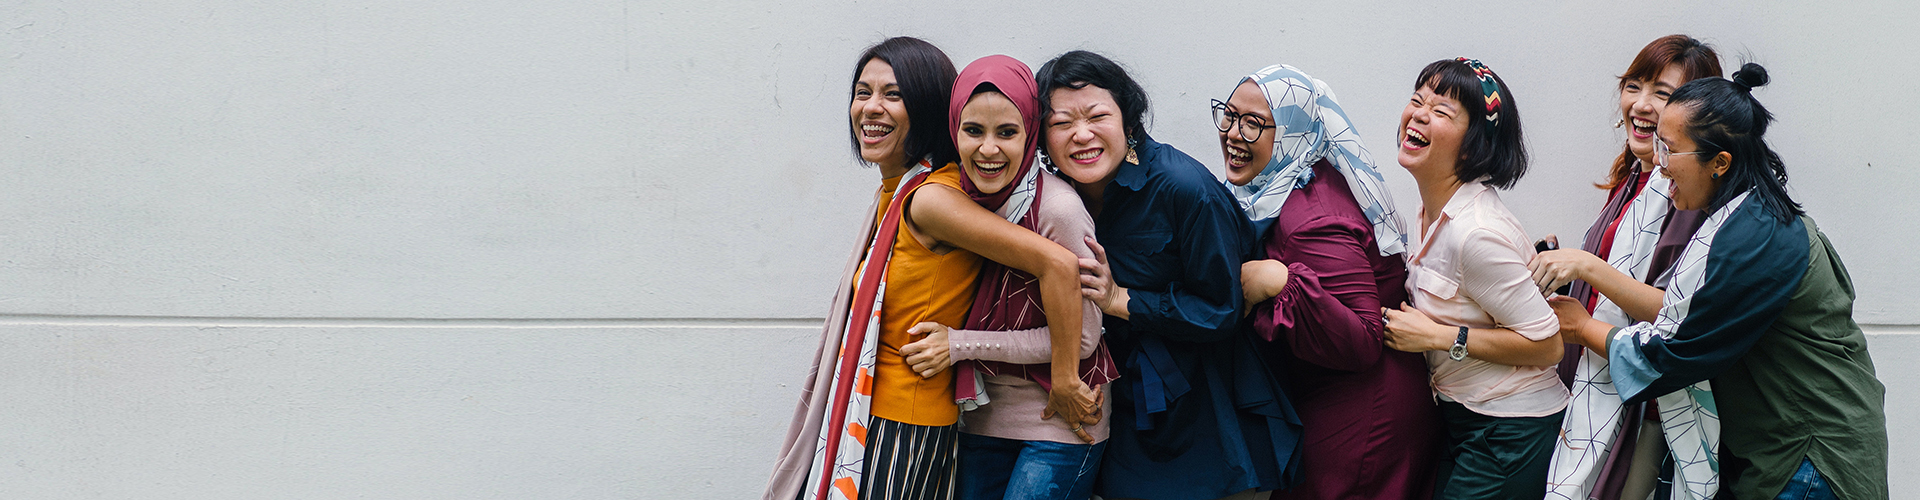 A group of diverse young adults smiling and laughing while hugging each other in a line.